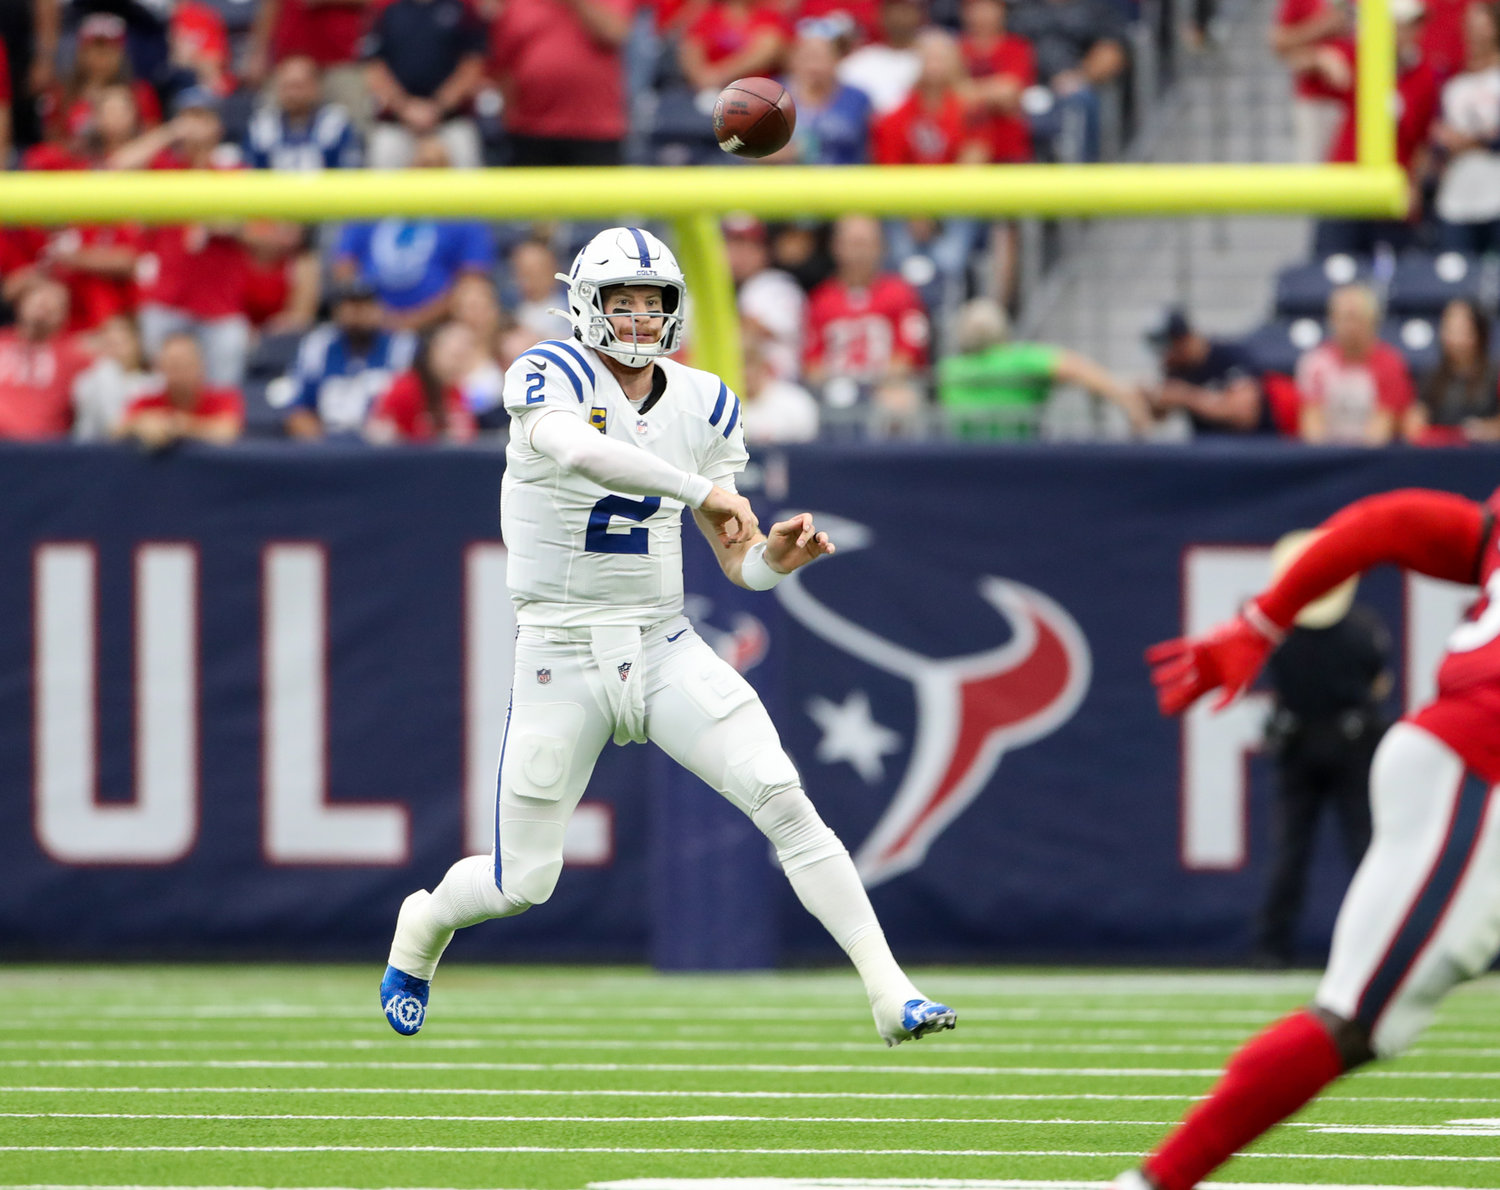 Indianapolis Colts quarterback Carson Wentz (2) passes the ball during an NFL game between the Texans and the Colts on December 5, 2021 in Houston, Texas.